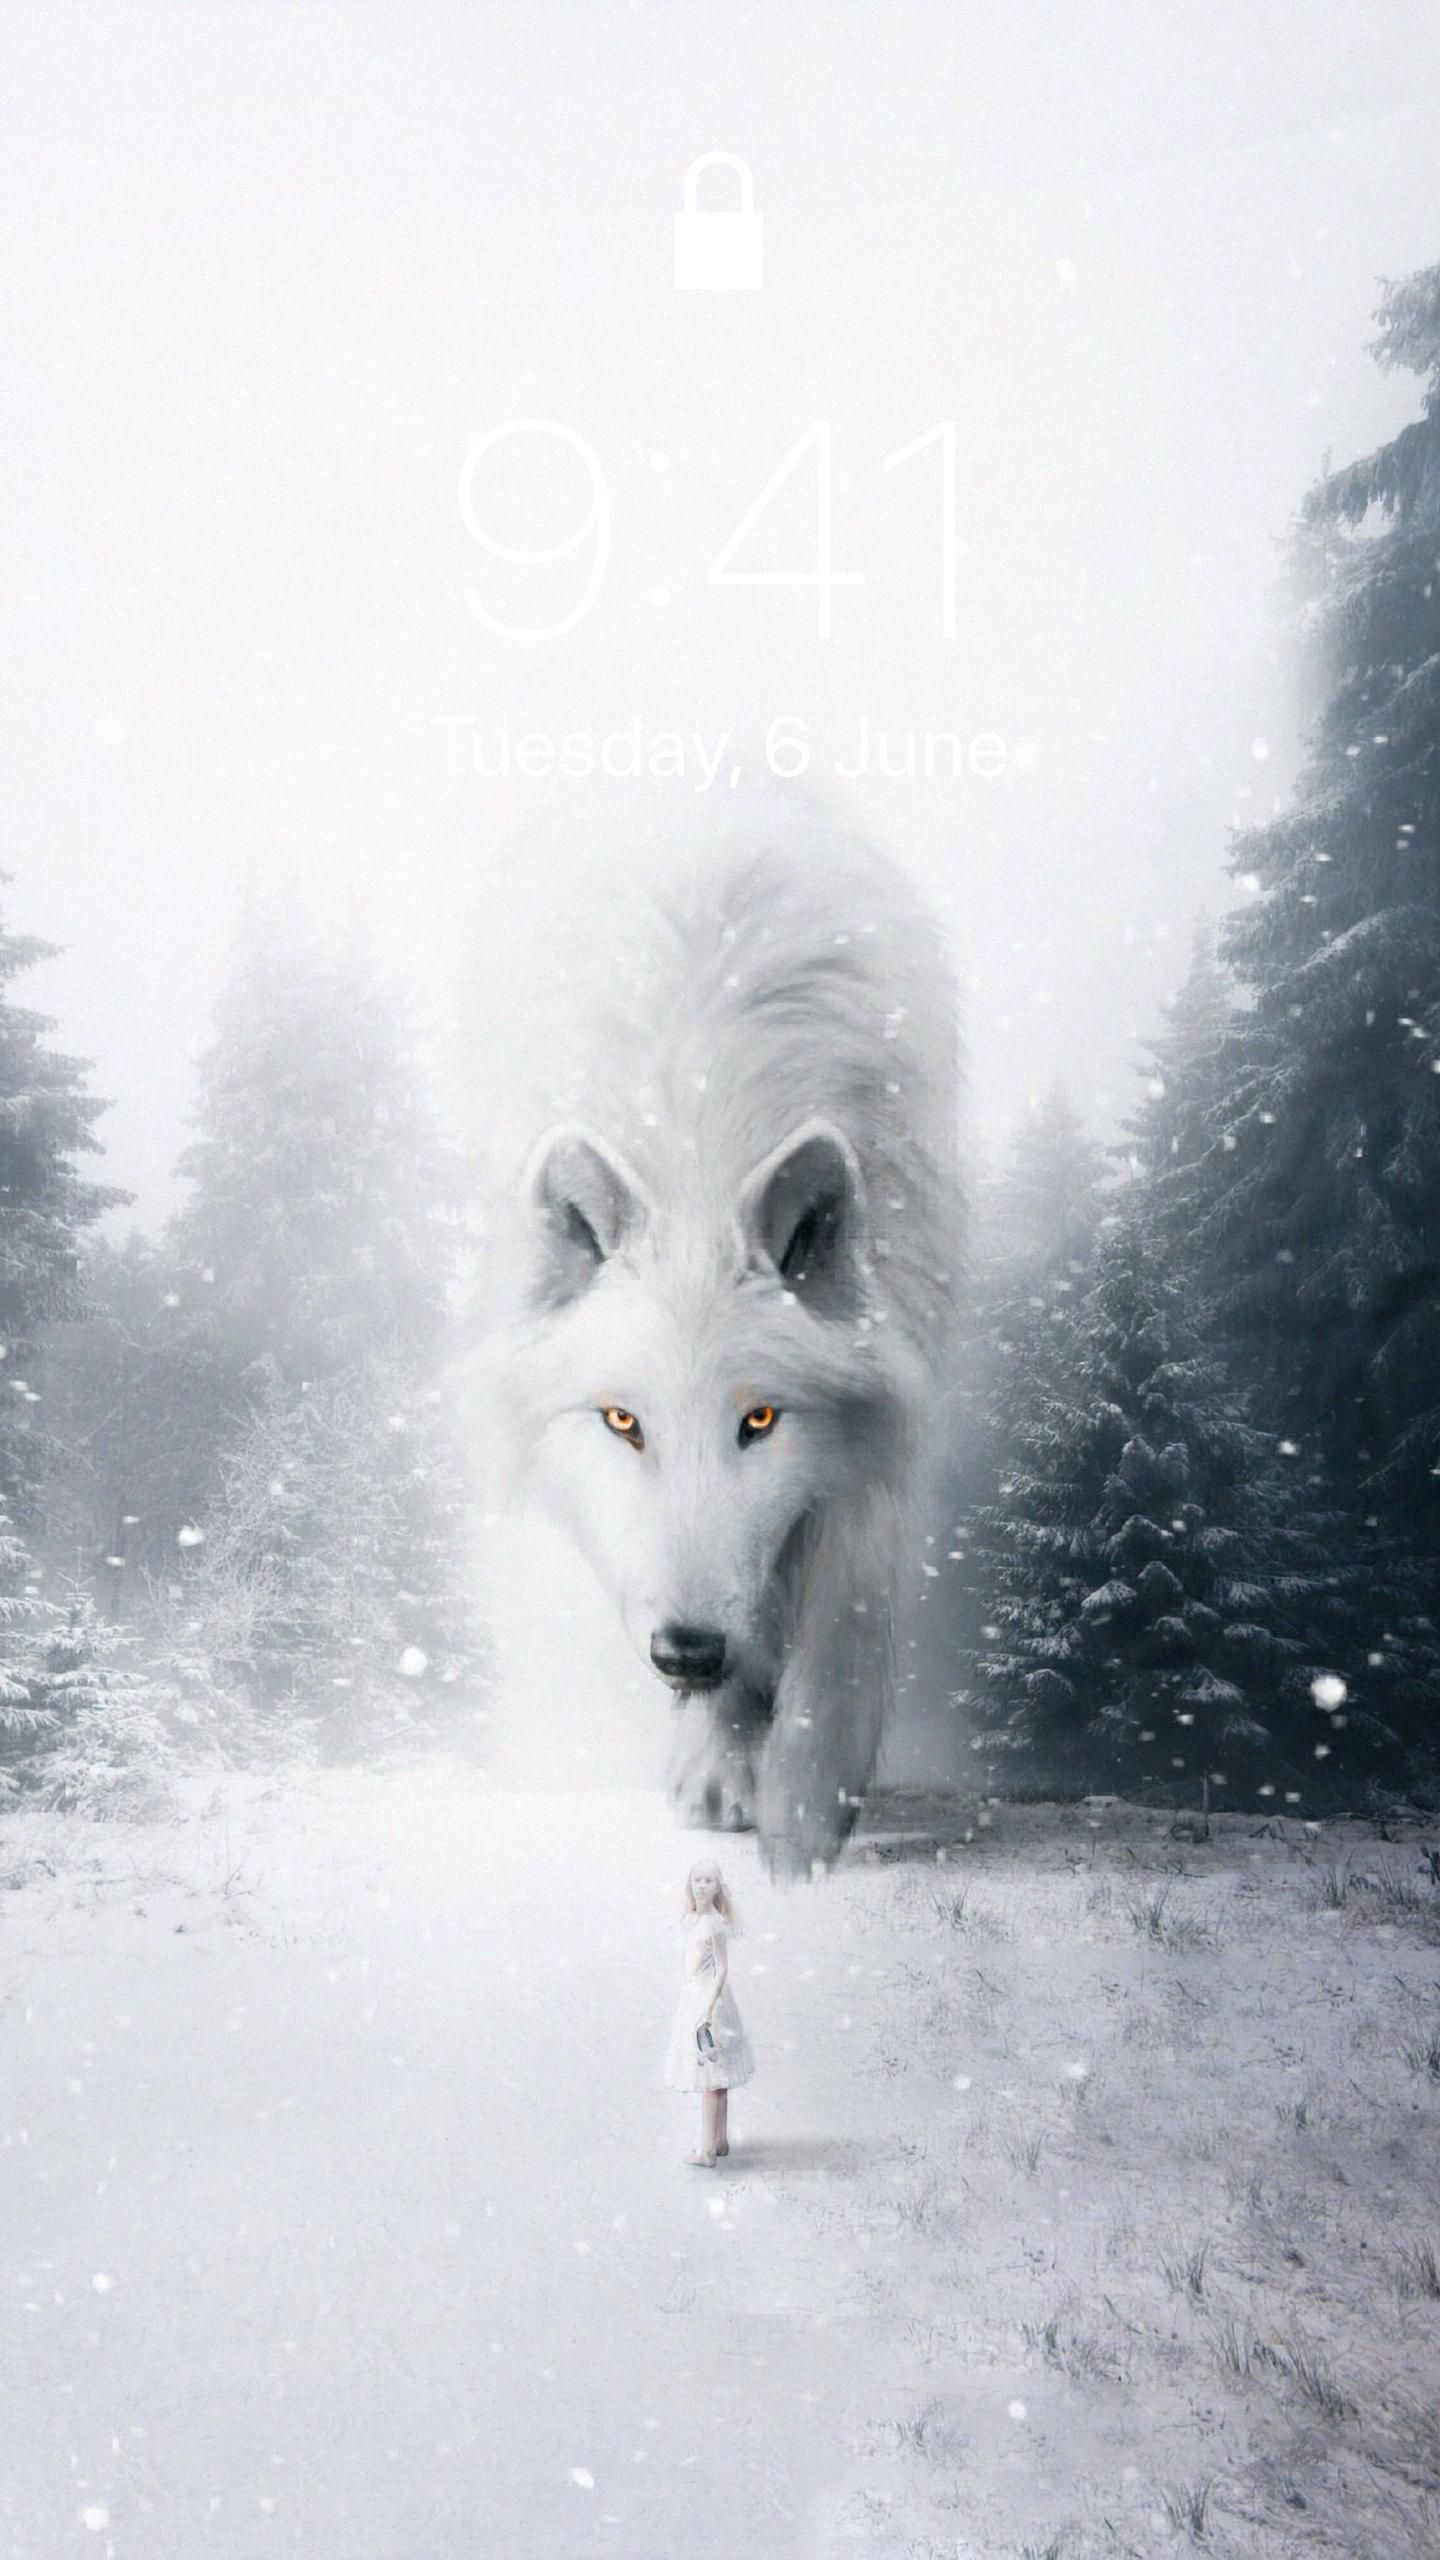 White Wolf Wallpaper For iPhone ideas. wolf wallpaper, white wolf, wolf